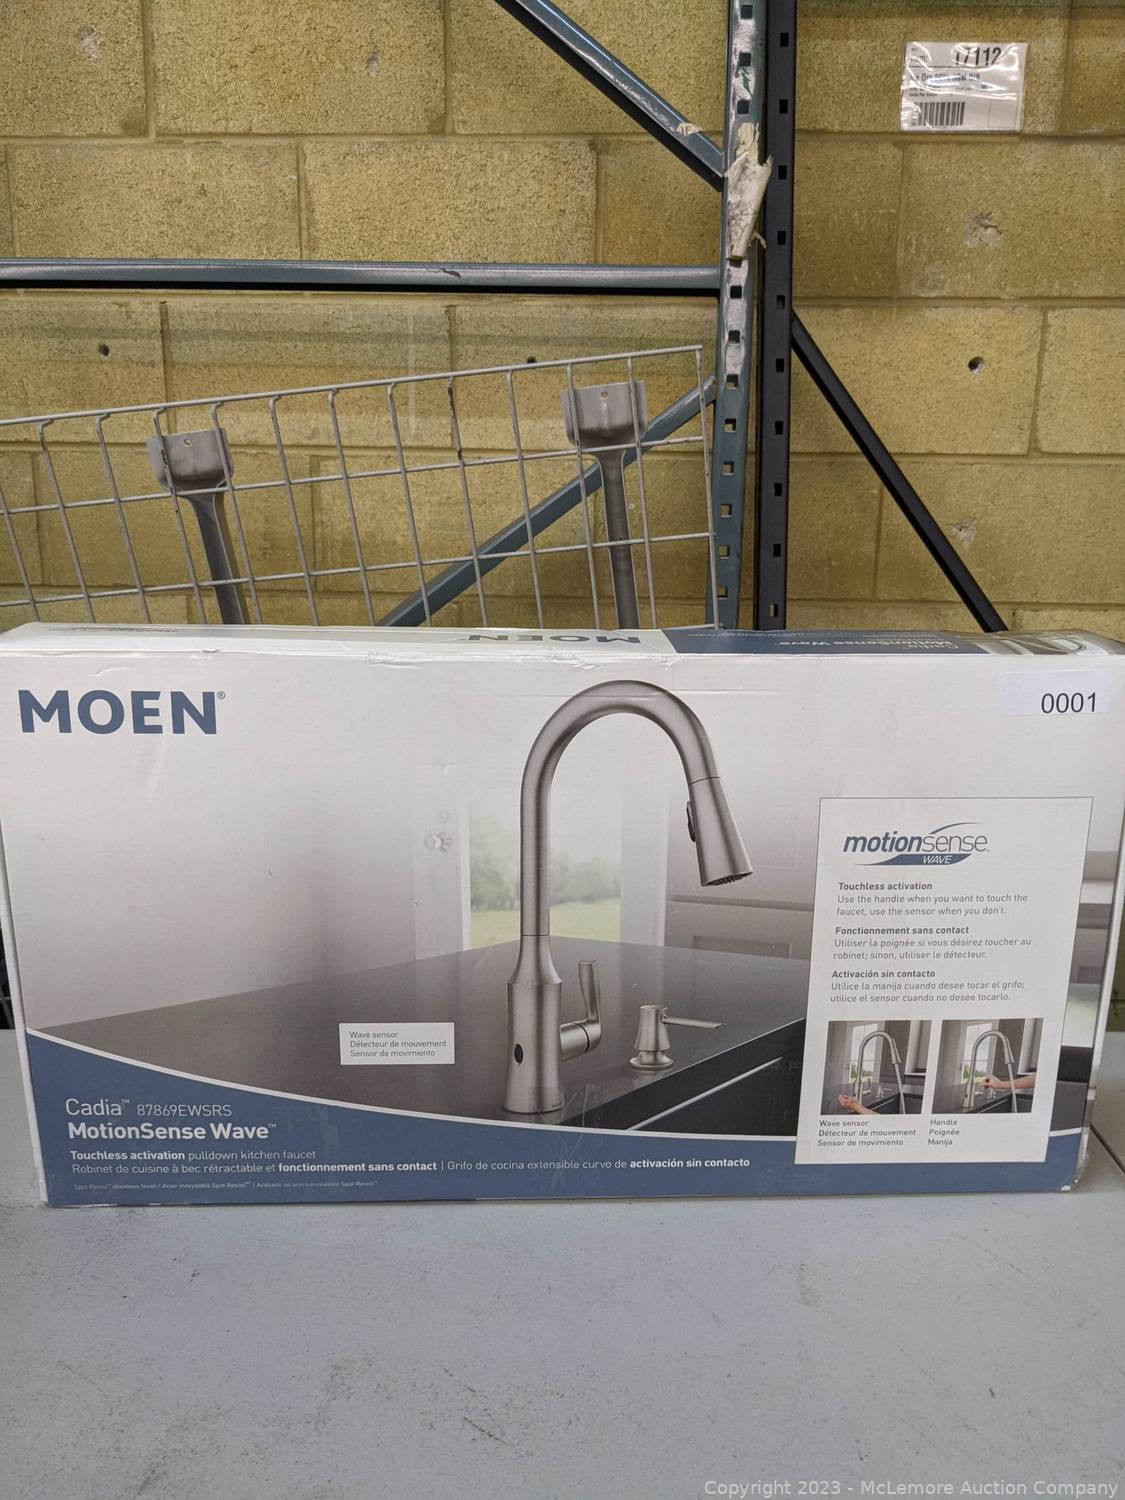 McLemore Auction Company – Auction: Brand New Items from the Wholesale Club You Love – Oakford Pellet Smoker, Charcoal/Gas Smoker and Grill Combo, Fire Table, Cantilever Umbrella, Hand Trucks, Fans, Faucets, Flexon Hoses and Outdoor LED Solar Lighting ITEM: New Open Box – – Moen Cadia Touchless Kitchen Faucet – MotionSense Wave Technology – Features Moens PowerClean Technology – Spot Resist Stainless Finish – NEW – $259 – See Link! (New